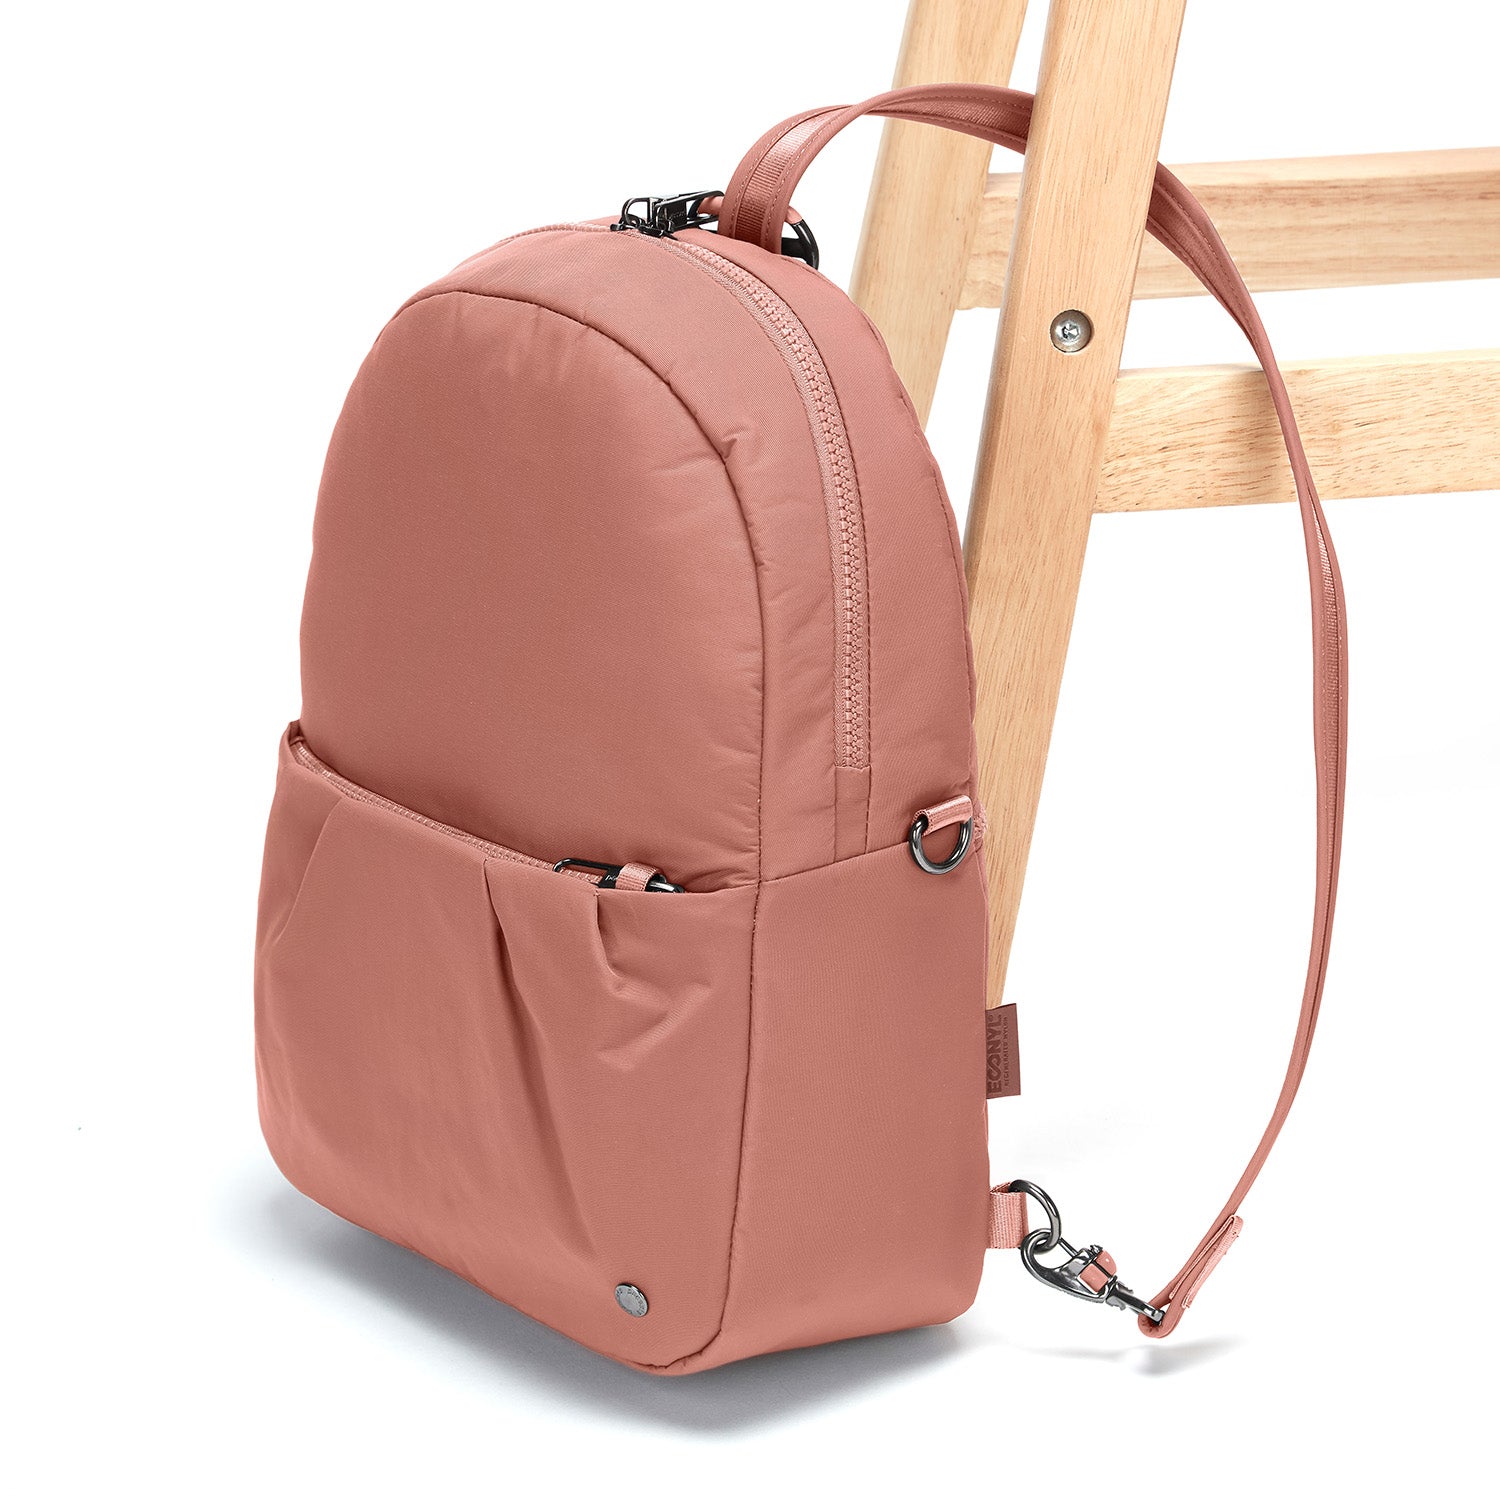 Pacsafe - CX Convertible Backpack - Rose-9